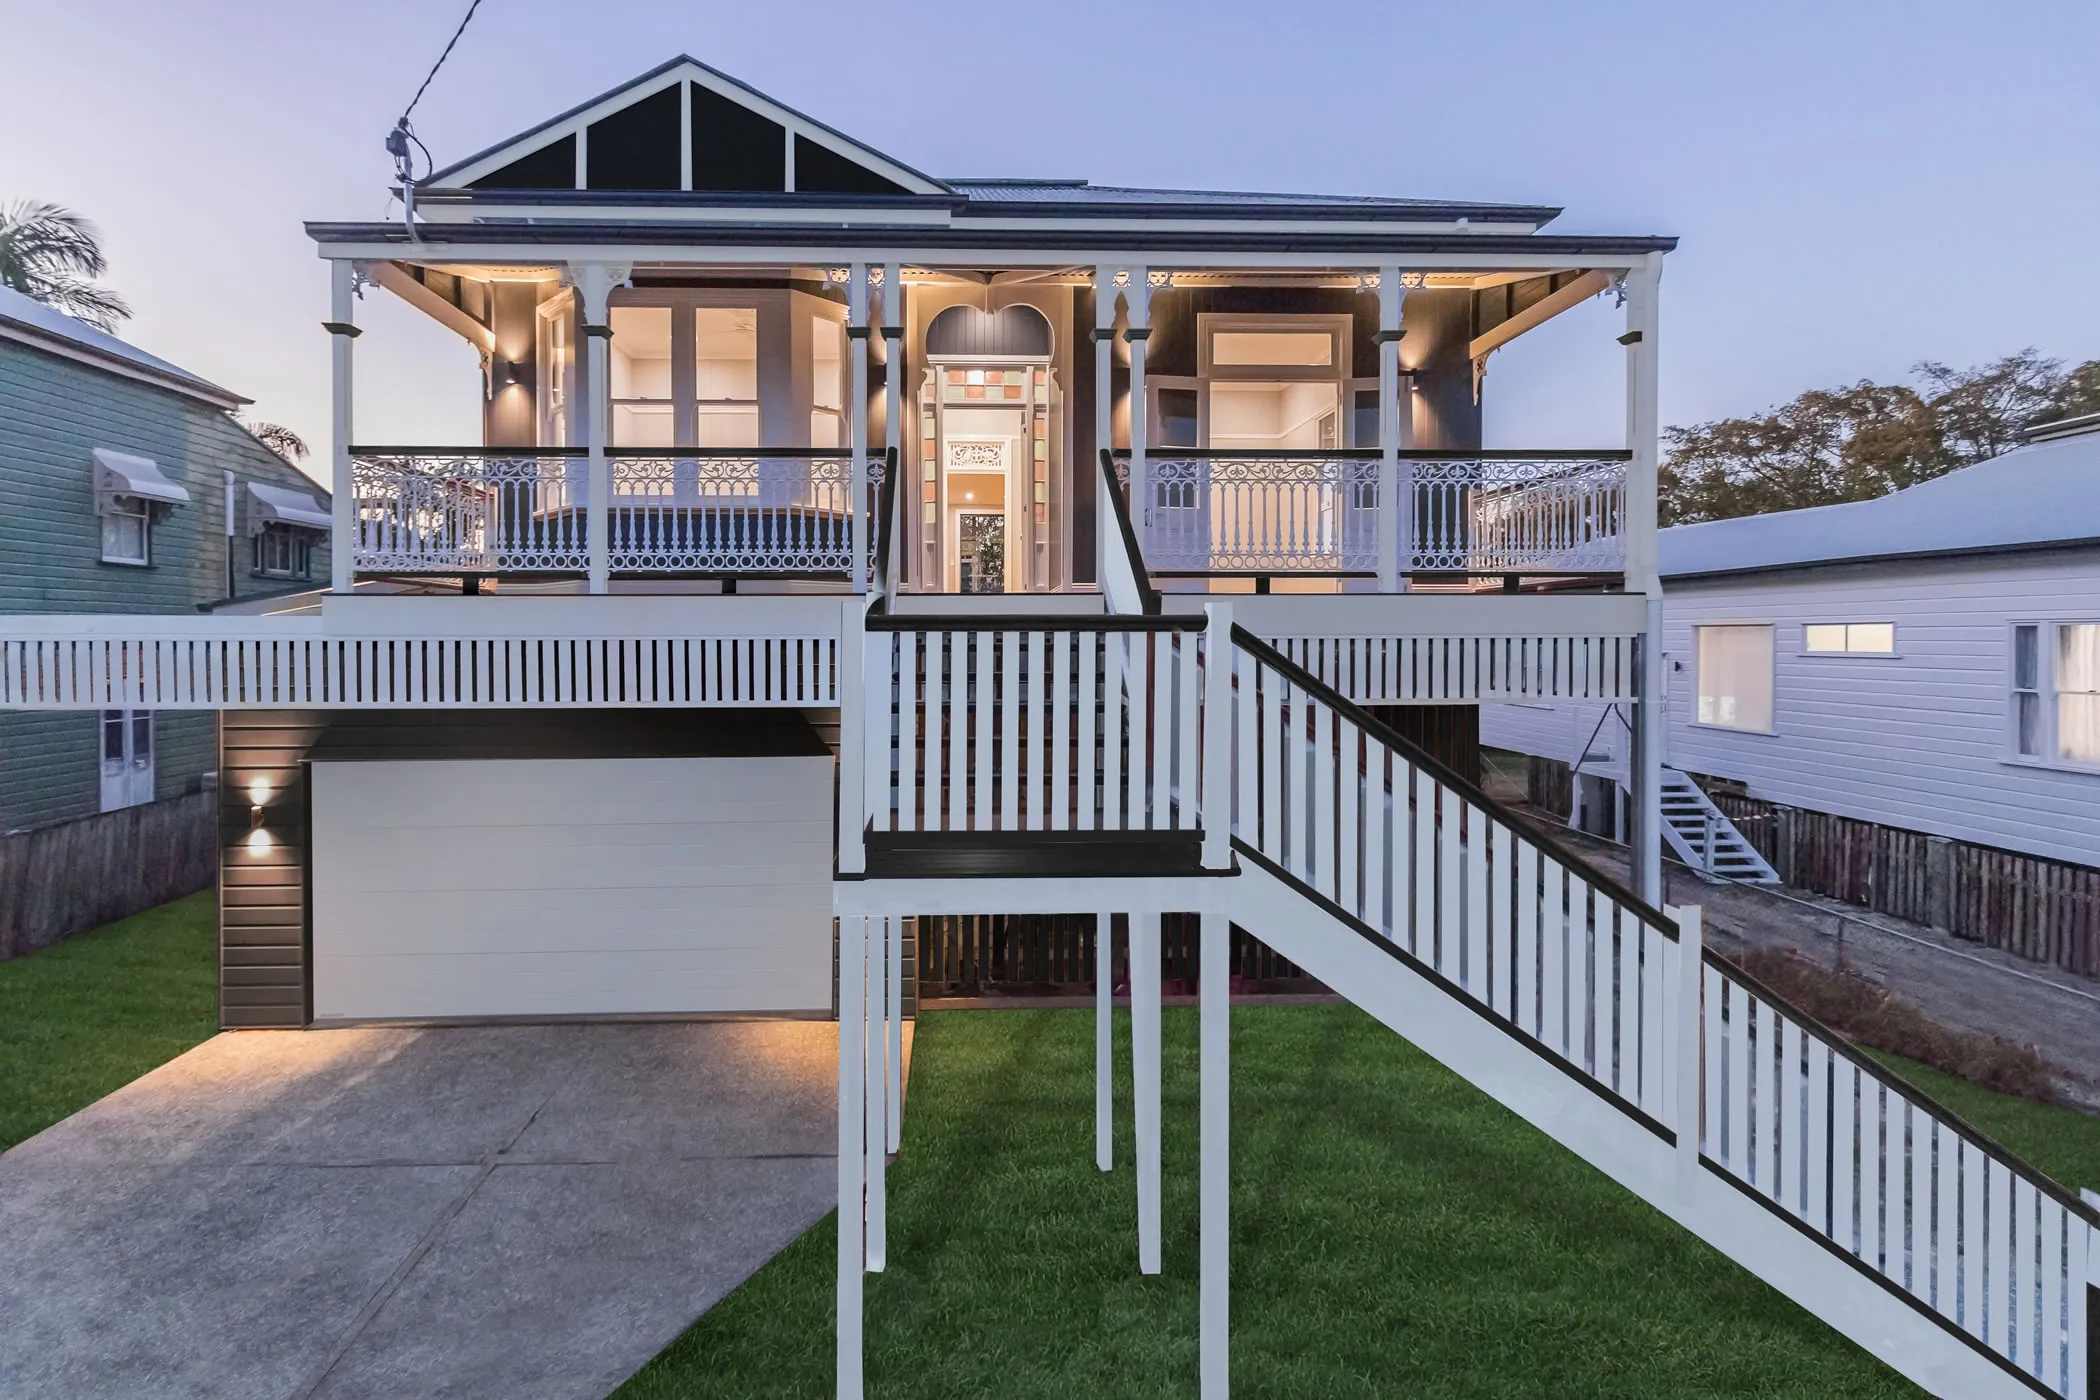 Traditional Queenslander Renovation Front of house, lace work and deck